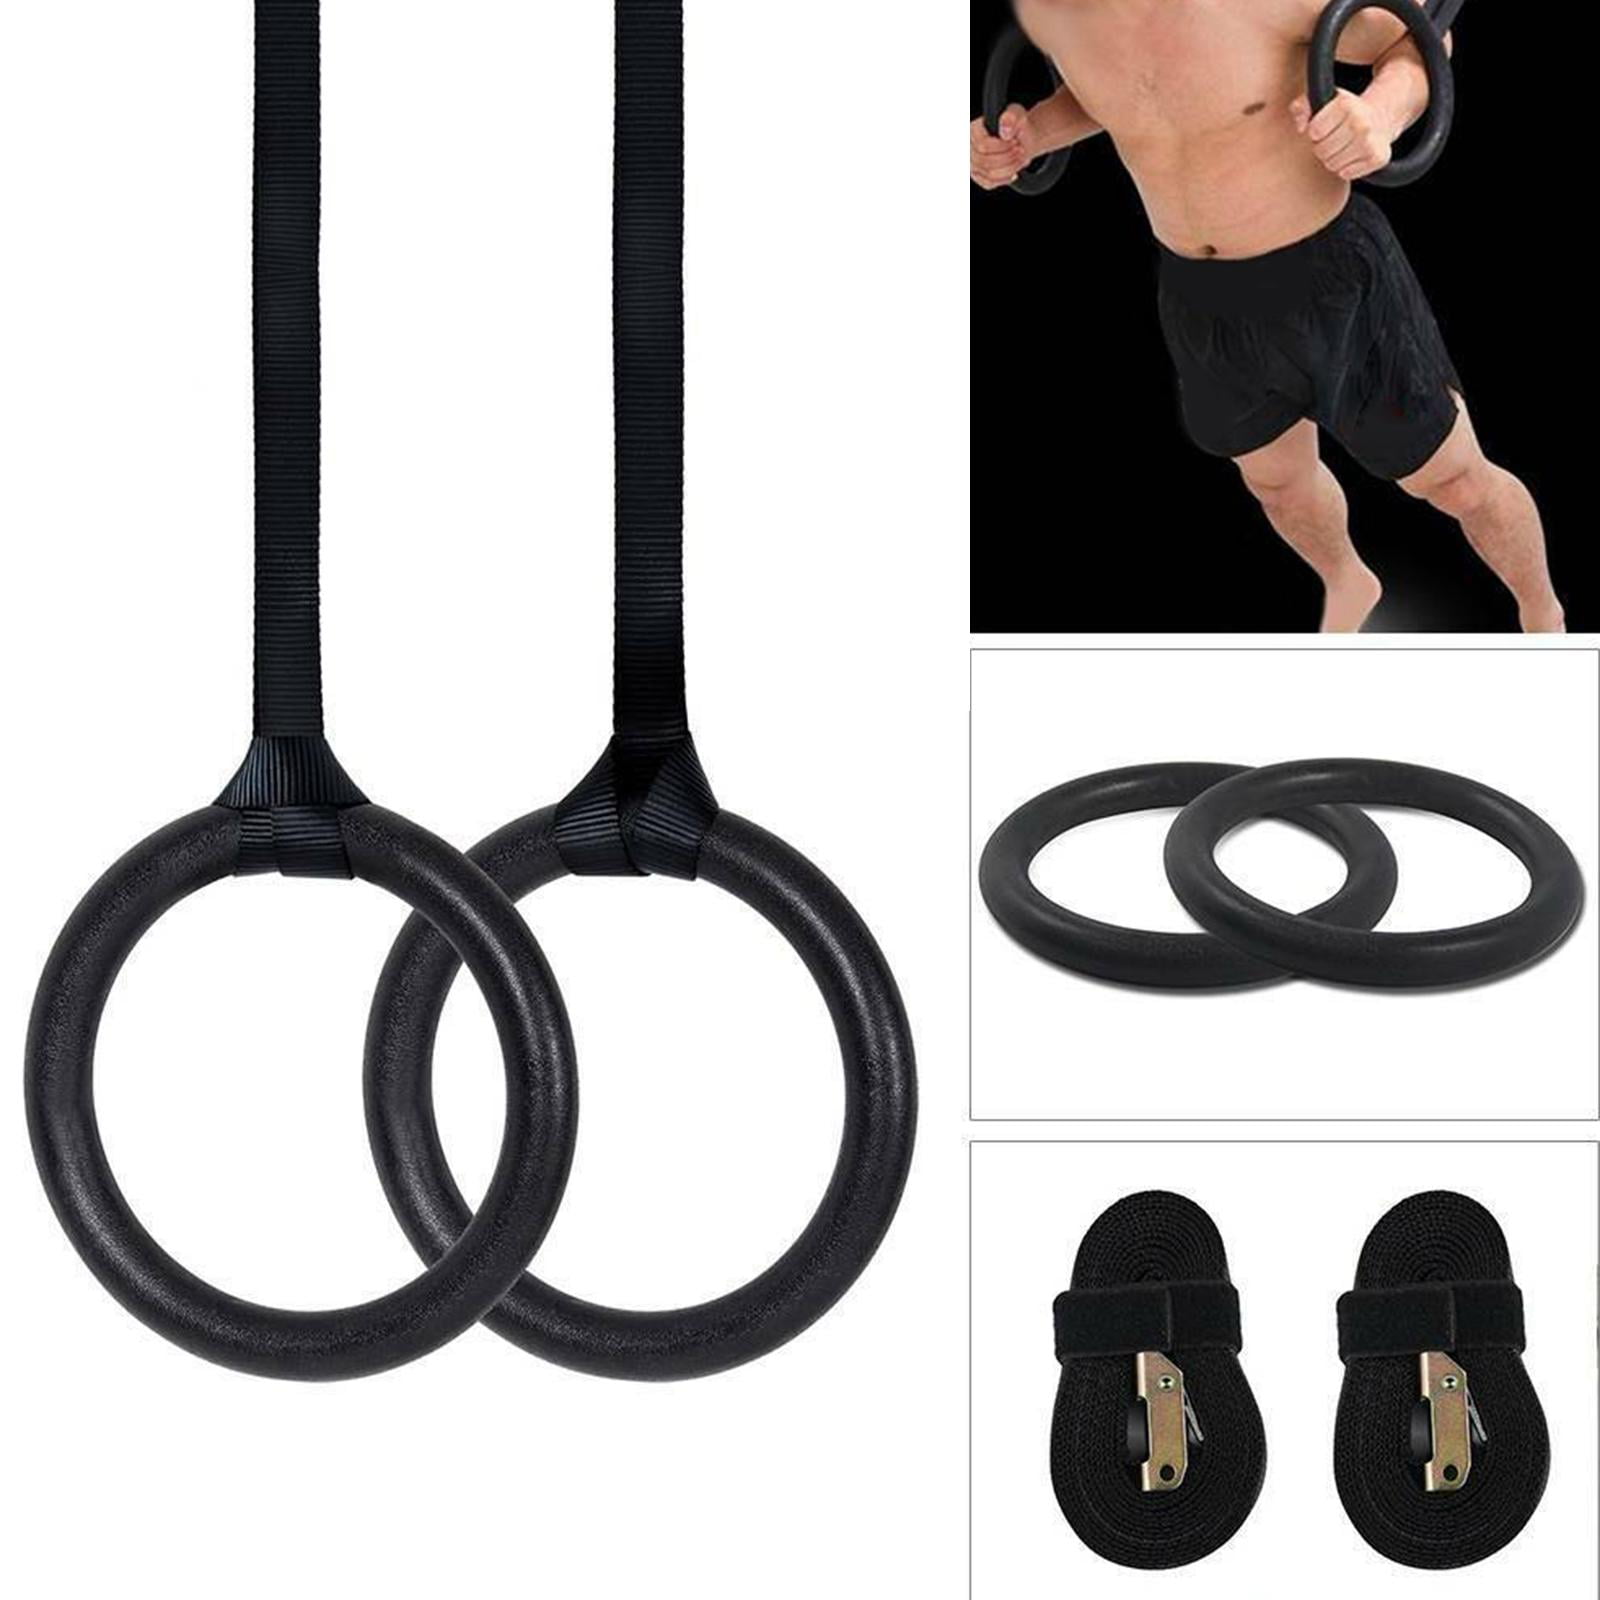 1 Pair Wooden Gymnastic Rings with Adjustable Buckle Straps 330lbs Capacity for Home Rings Gymnastic Rings 